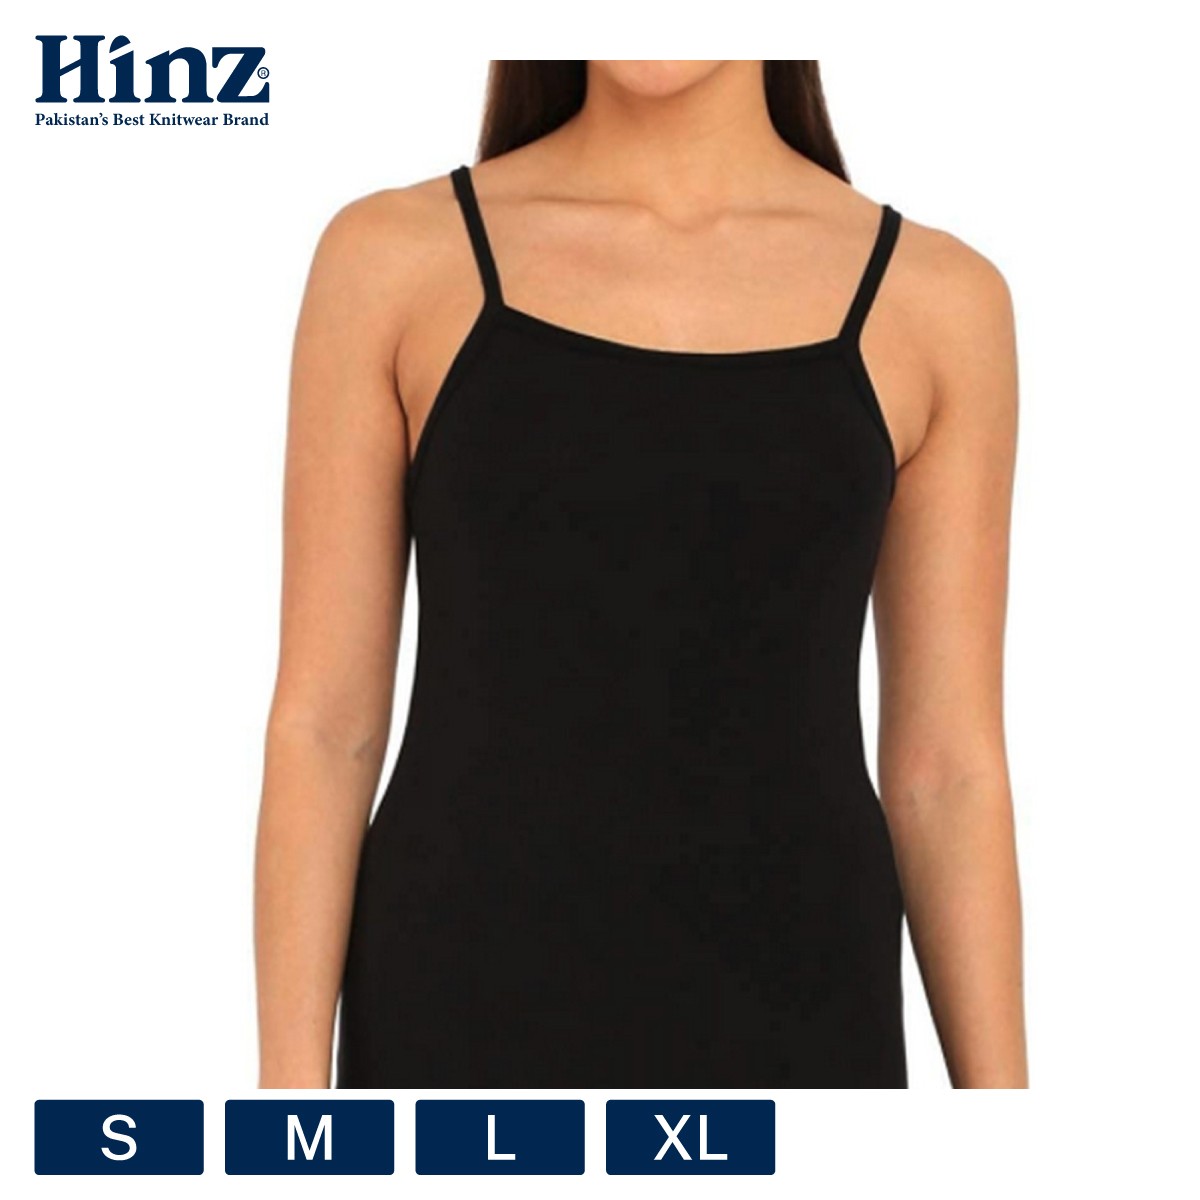 Hinz Women’s Thermal Camisole Combed Cotton